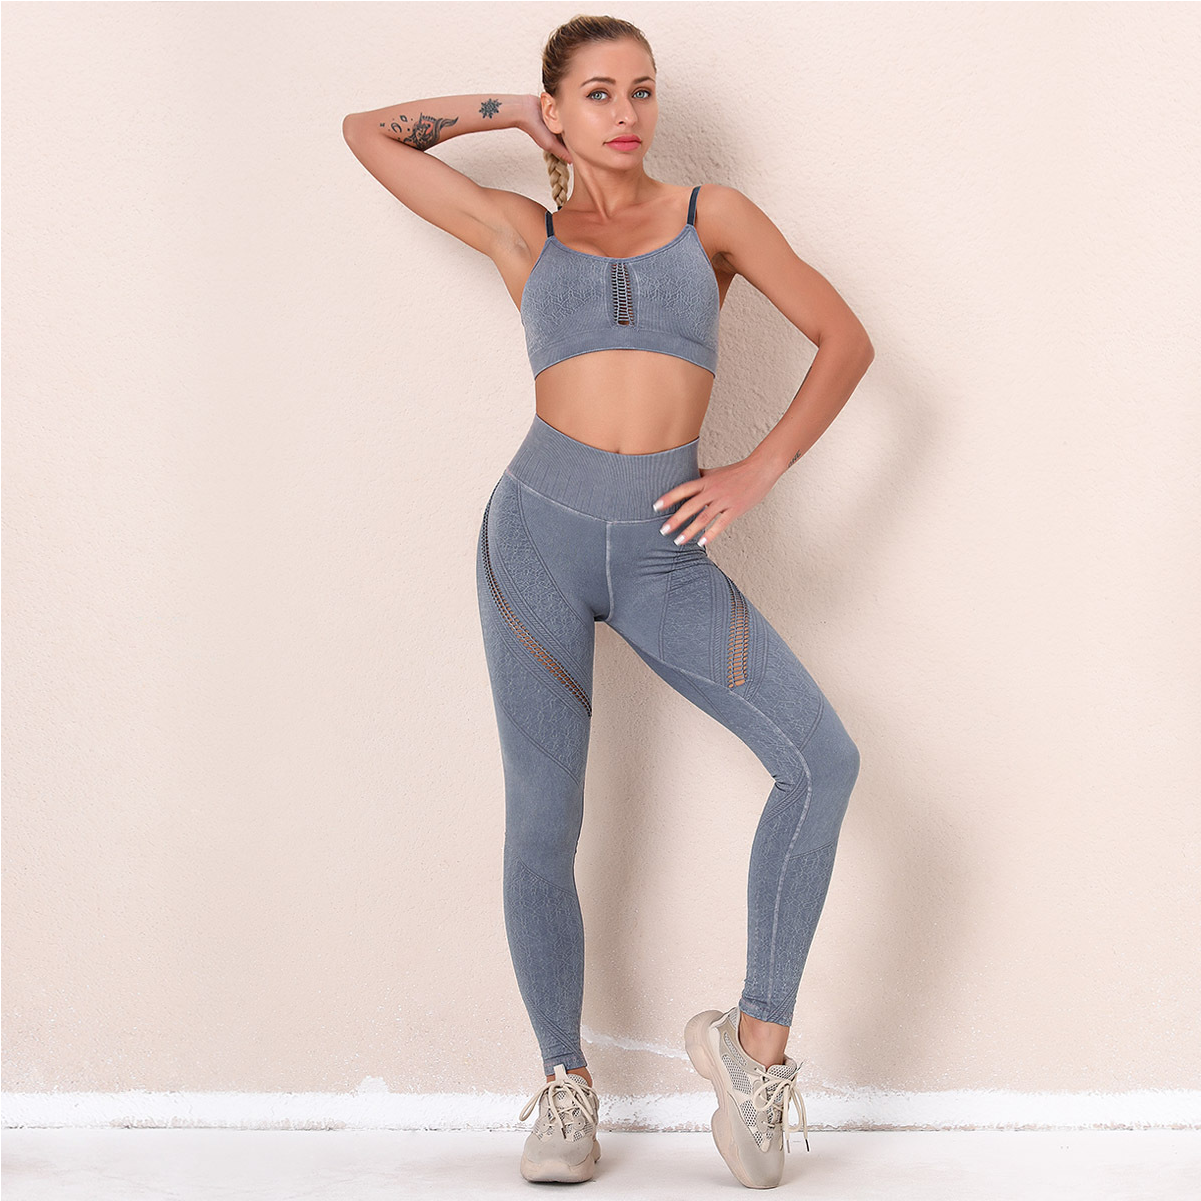 Sand Washed High-Waisted Knit Leggings and Top w-Breathable Holes - Set